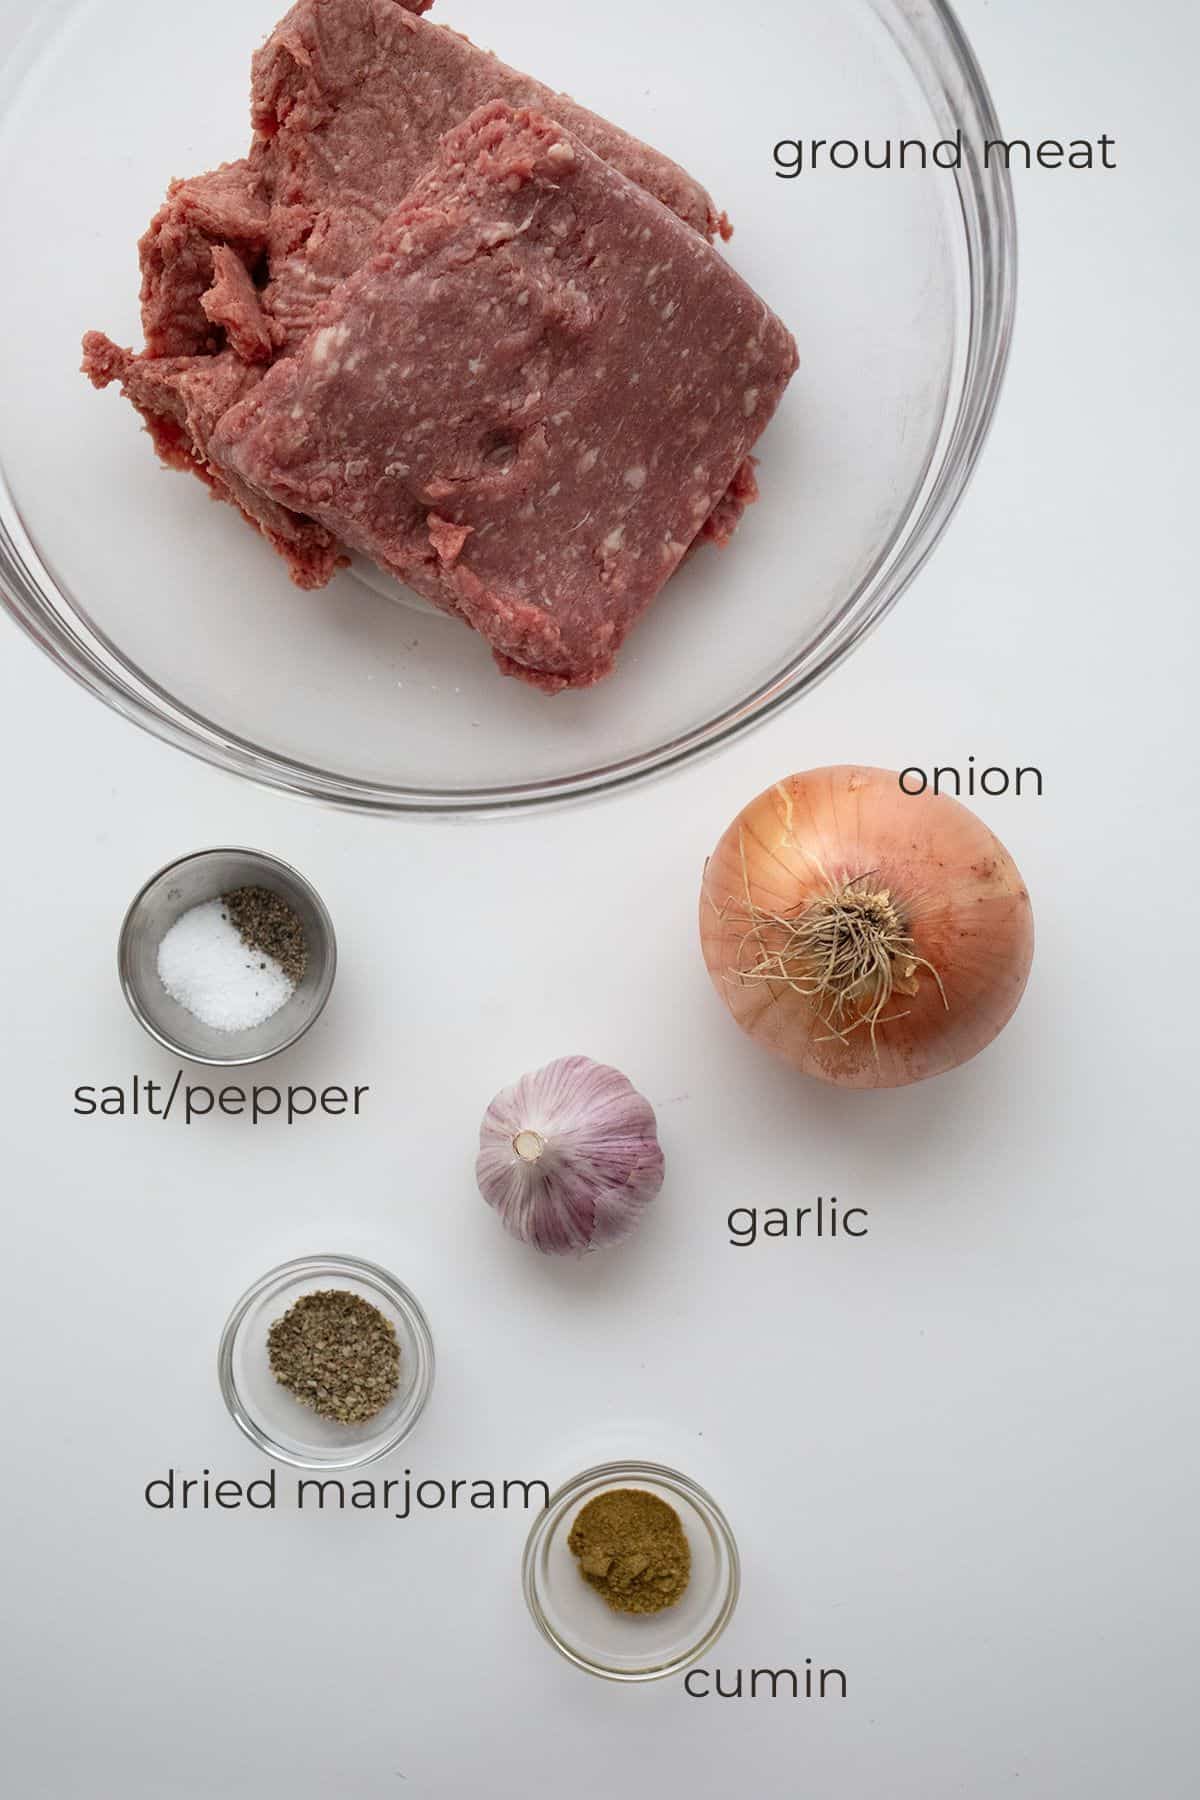 Top down image of ingredients needed for making your own gyro meat.